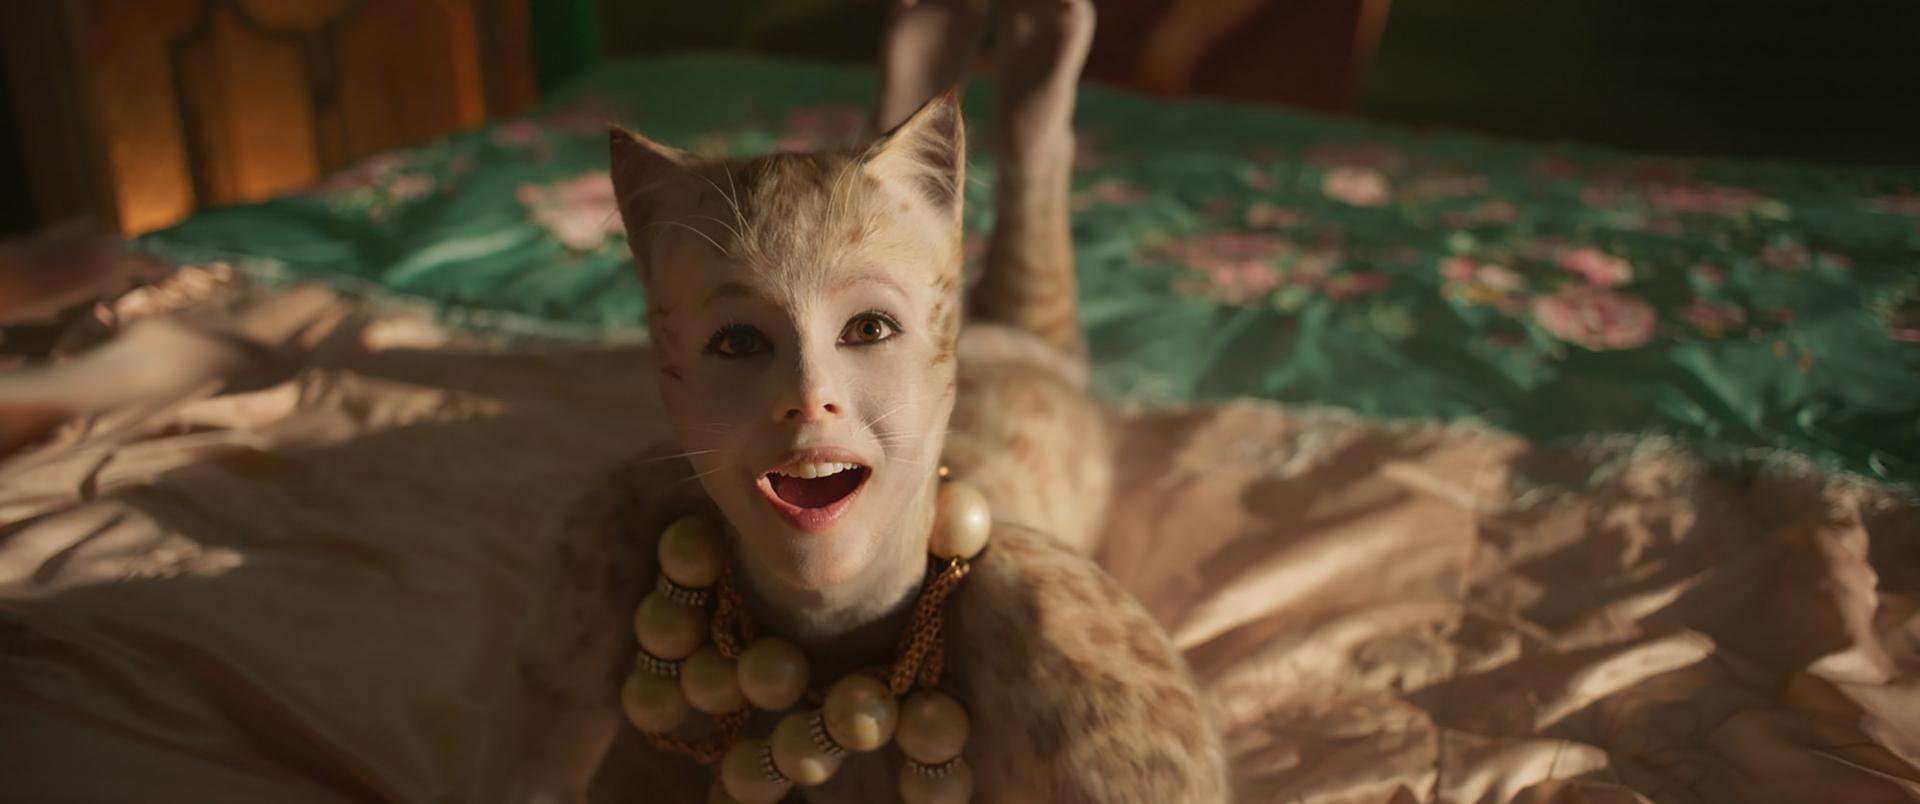 image for Cats has ended its domestic run after 8 weeks with a total of $27.2M.